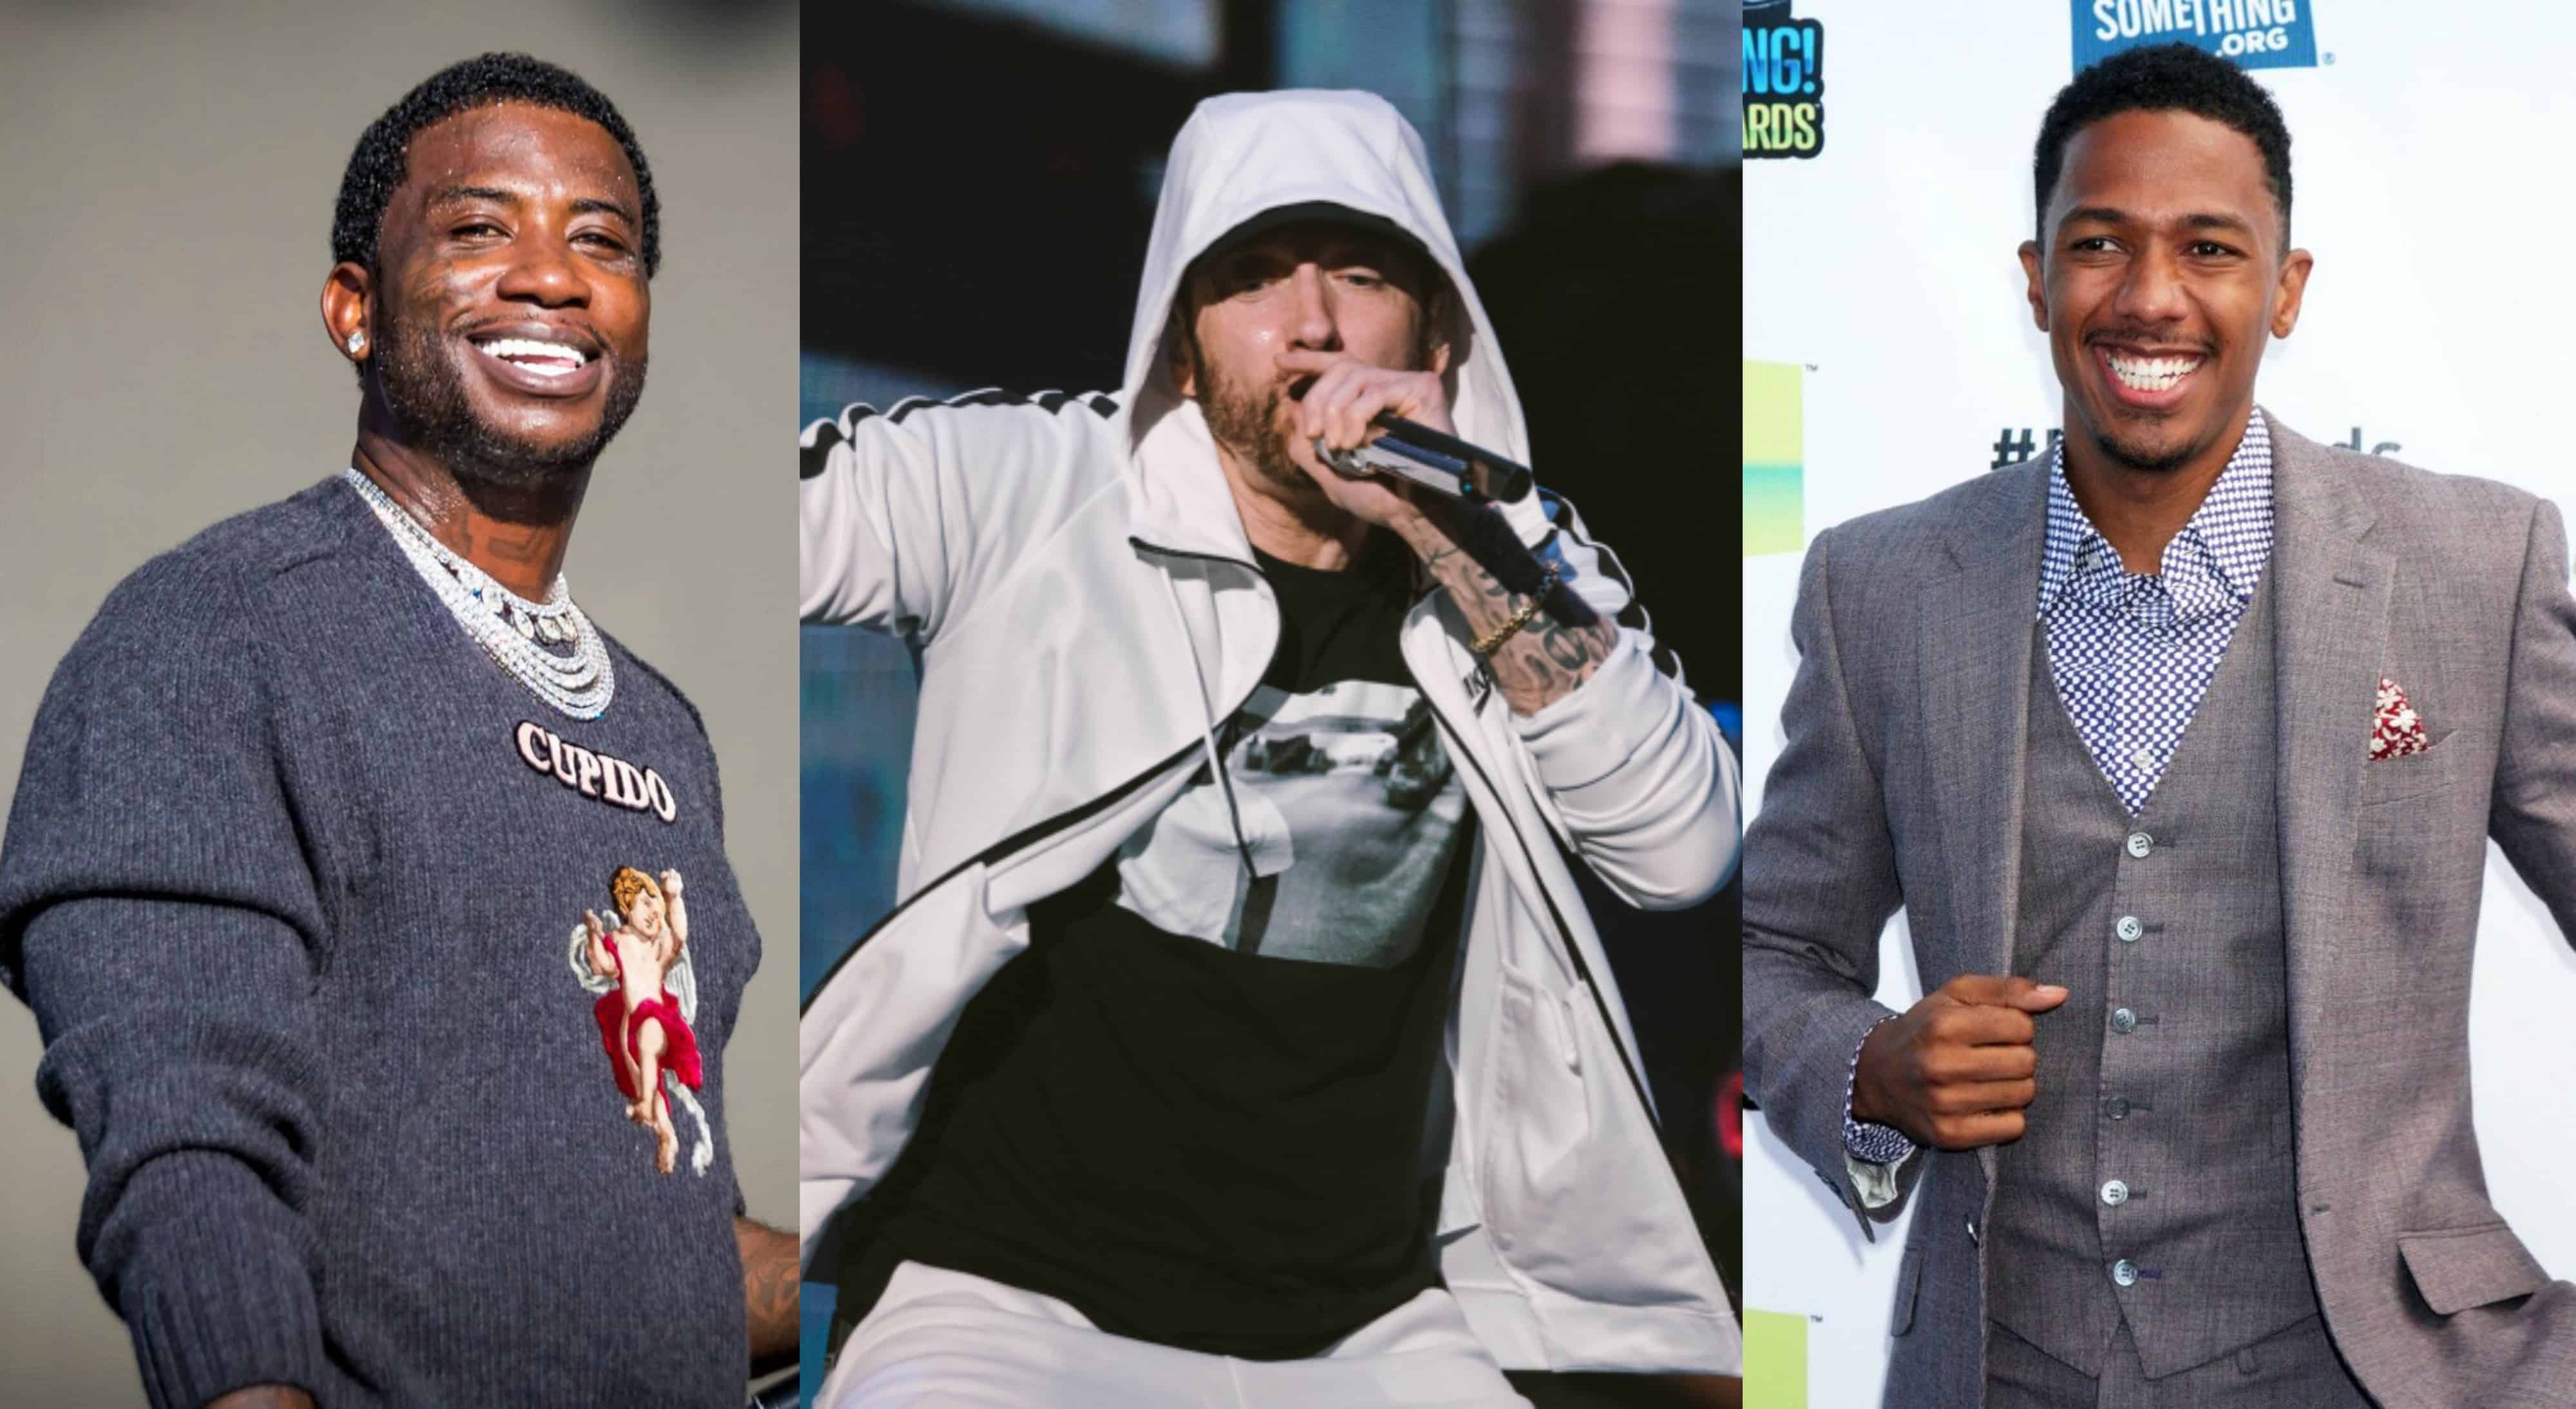 bur helikopter tyk Watch: Nick Cannon Says Gucci Mane Offered To 'Handle Things' During his  Eminem Beef